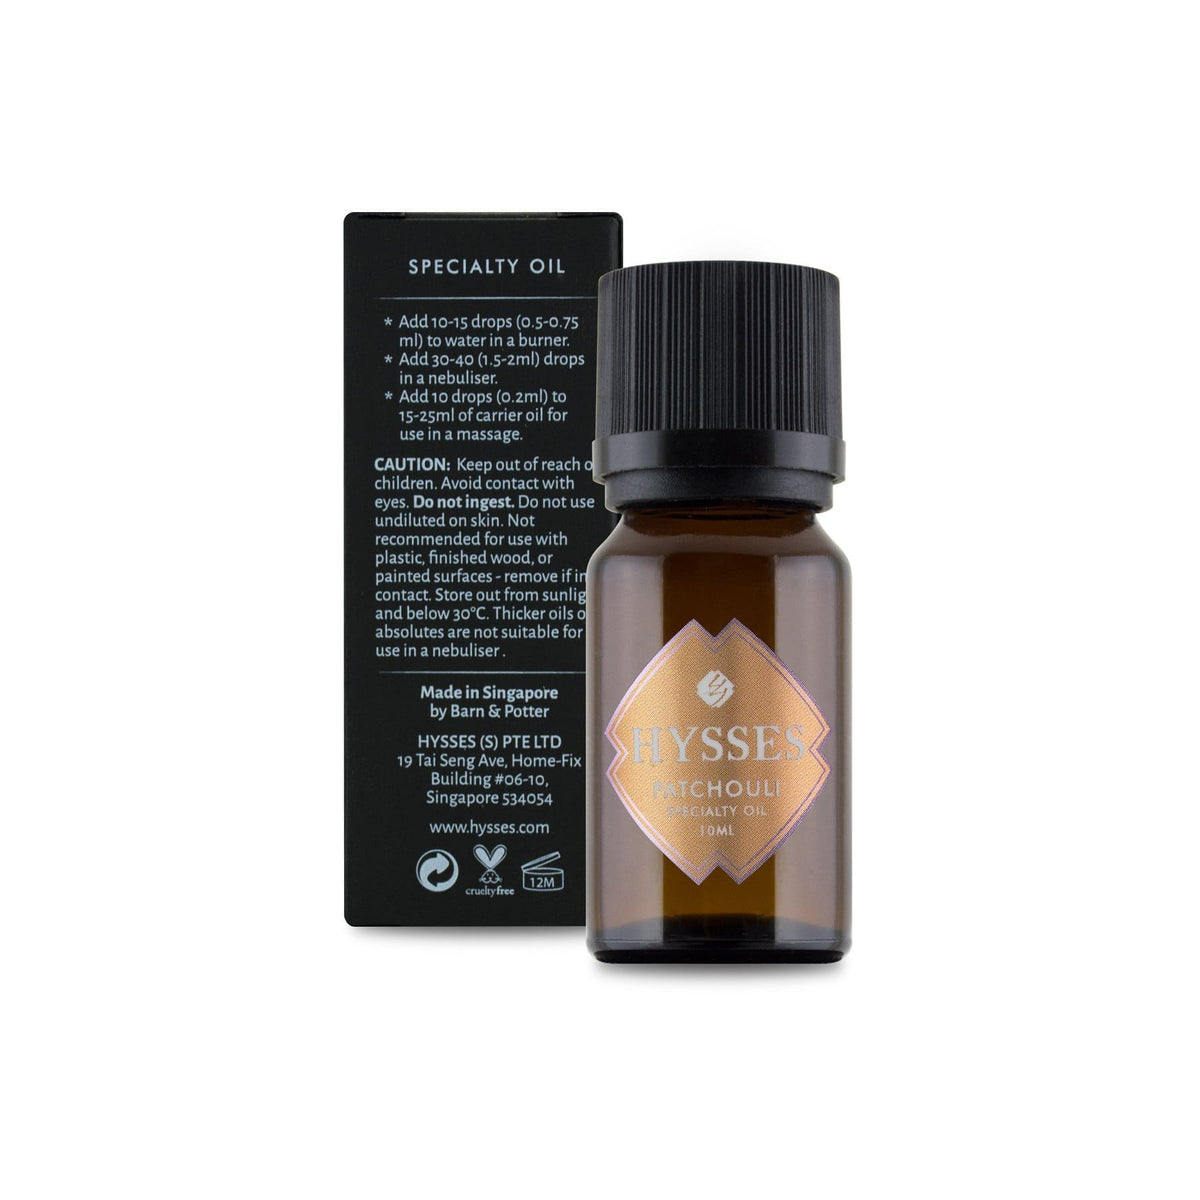 Hysses Essential Oil Specialty Oil Patchouli